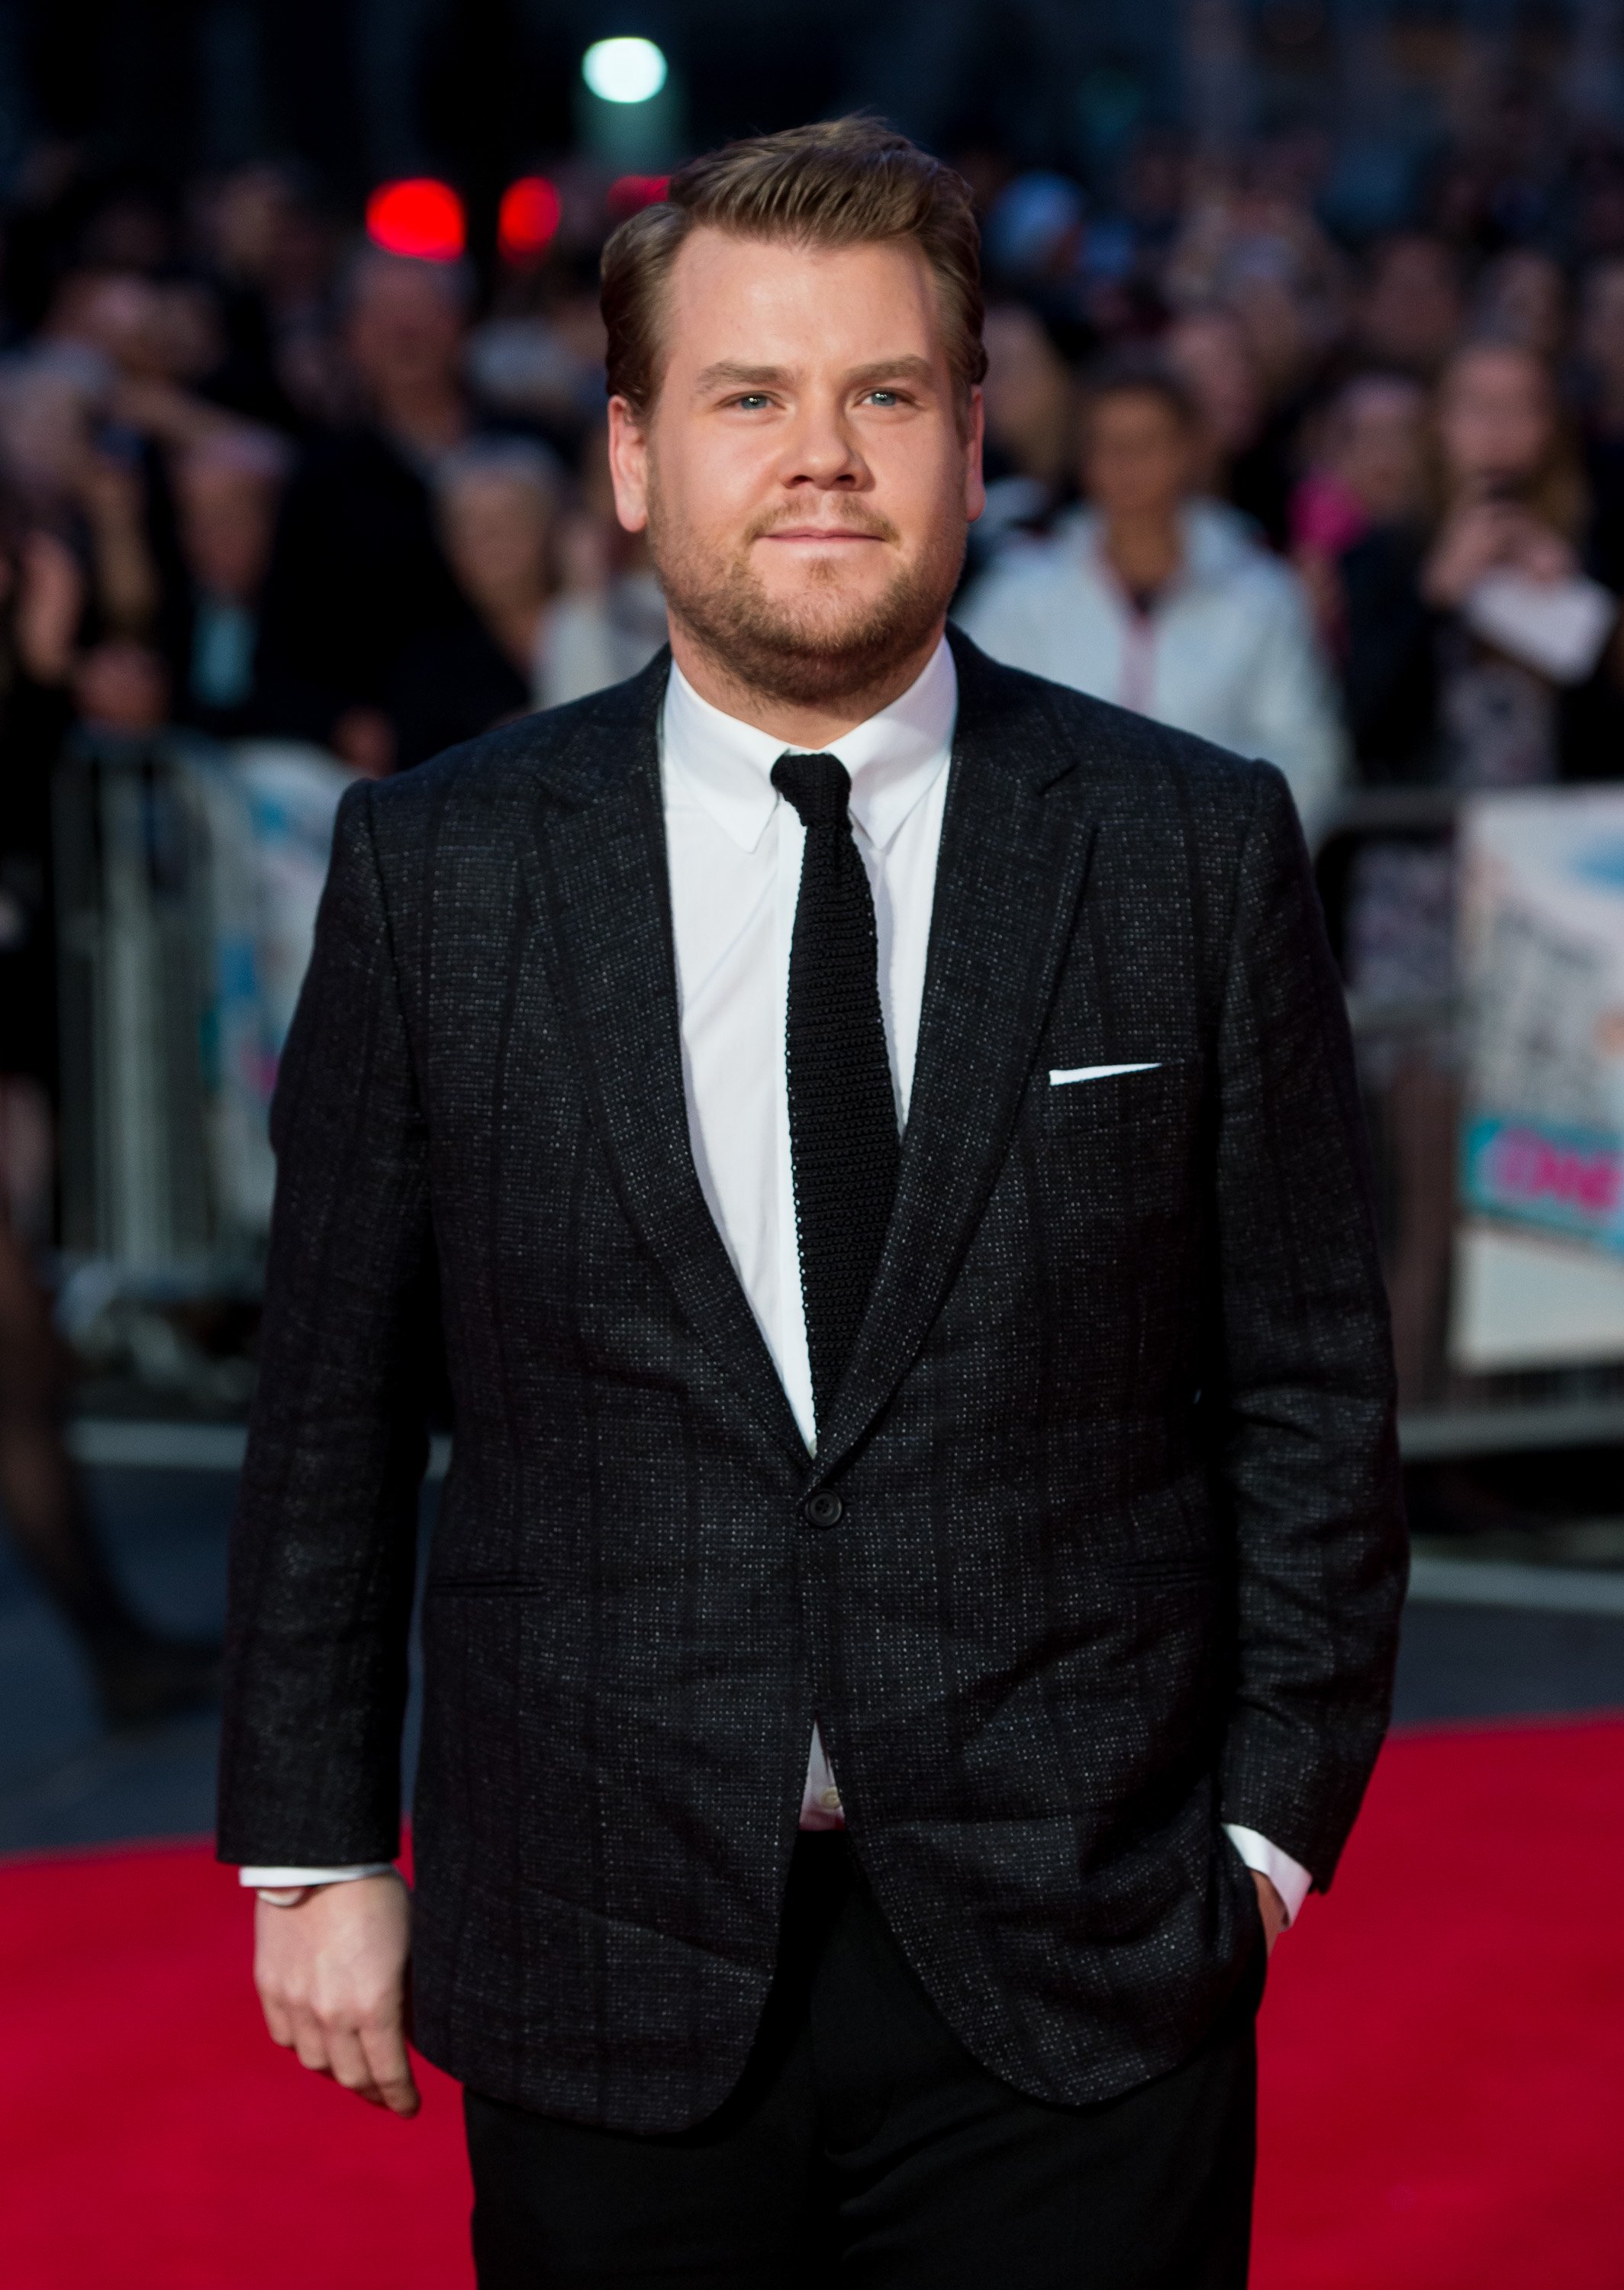 James Corden attends the premiere of "One Chance" in London, England on October 17, 2013. | Photo: Getty Images